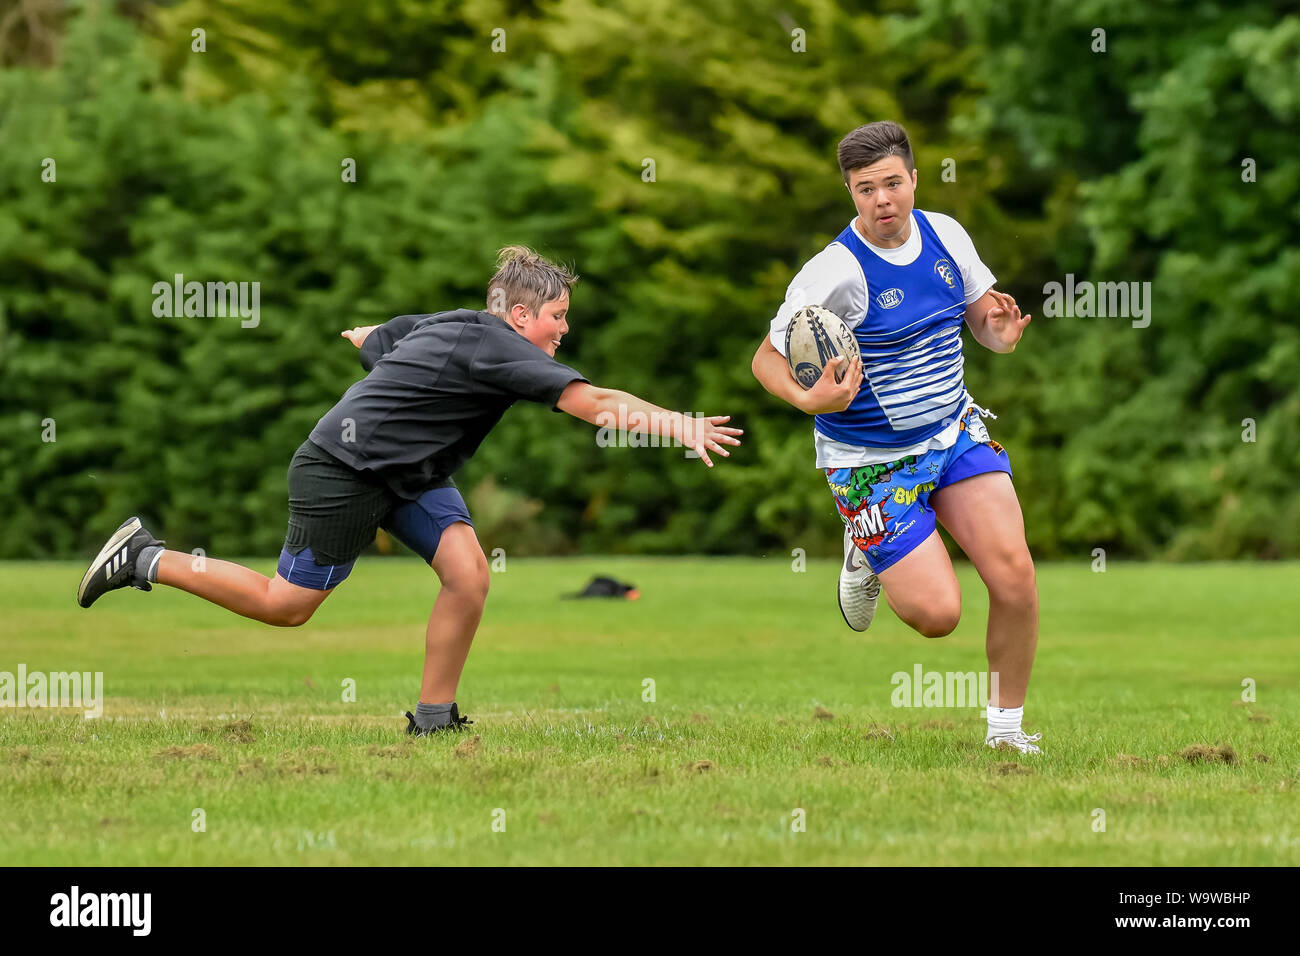 Young man (age 15-25) sprints with ball in hand as younger player (age 14-20) stretches to make a touch tackle at amateur Touch Rugby festival Stock Photo